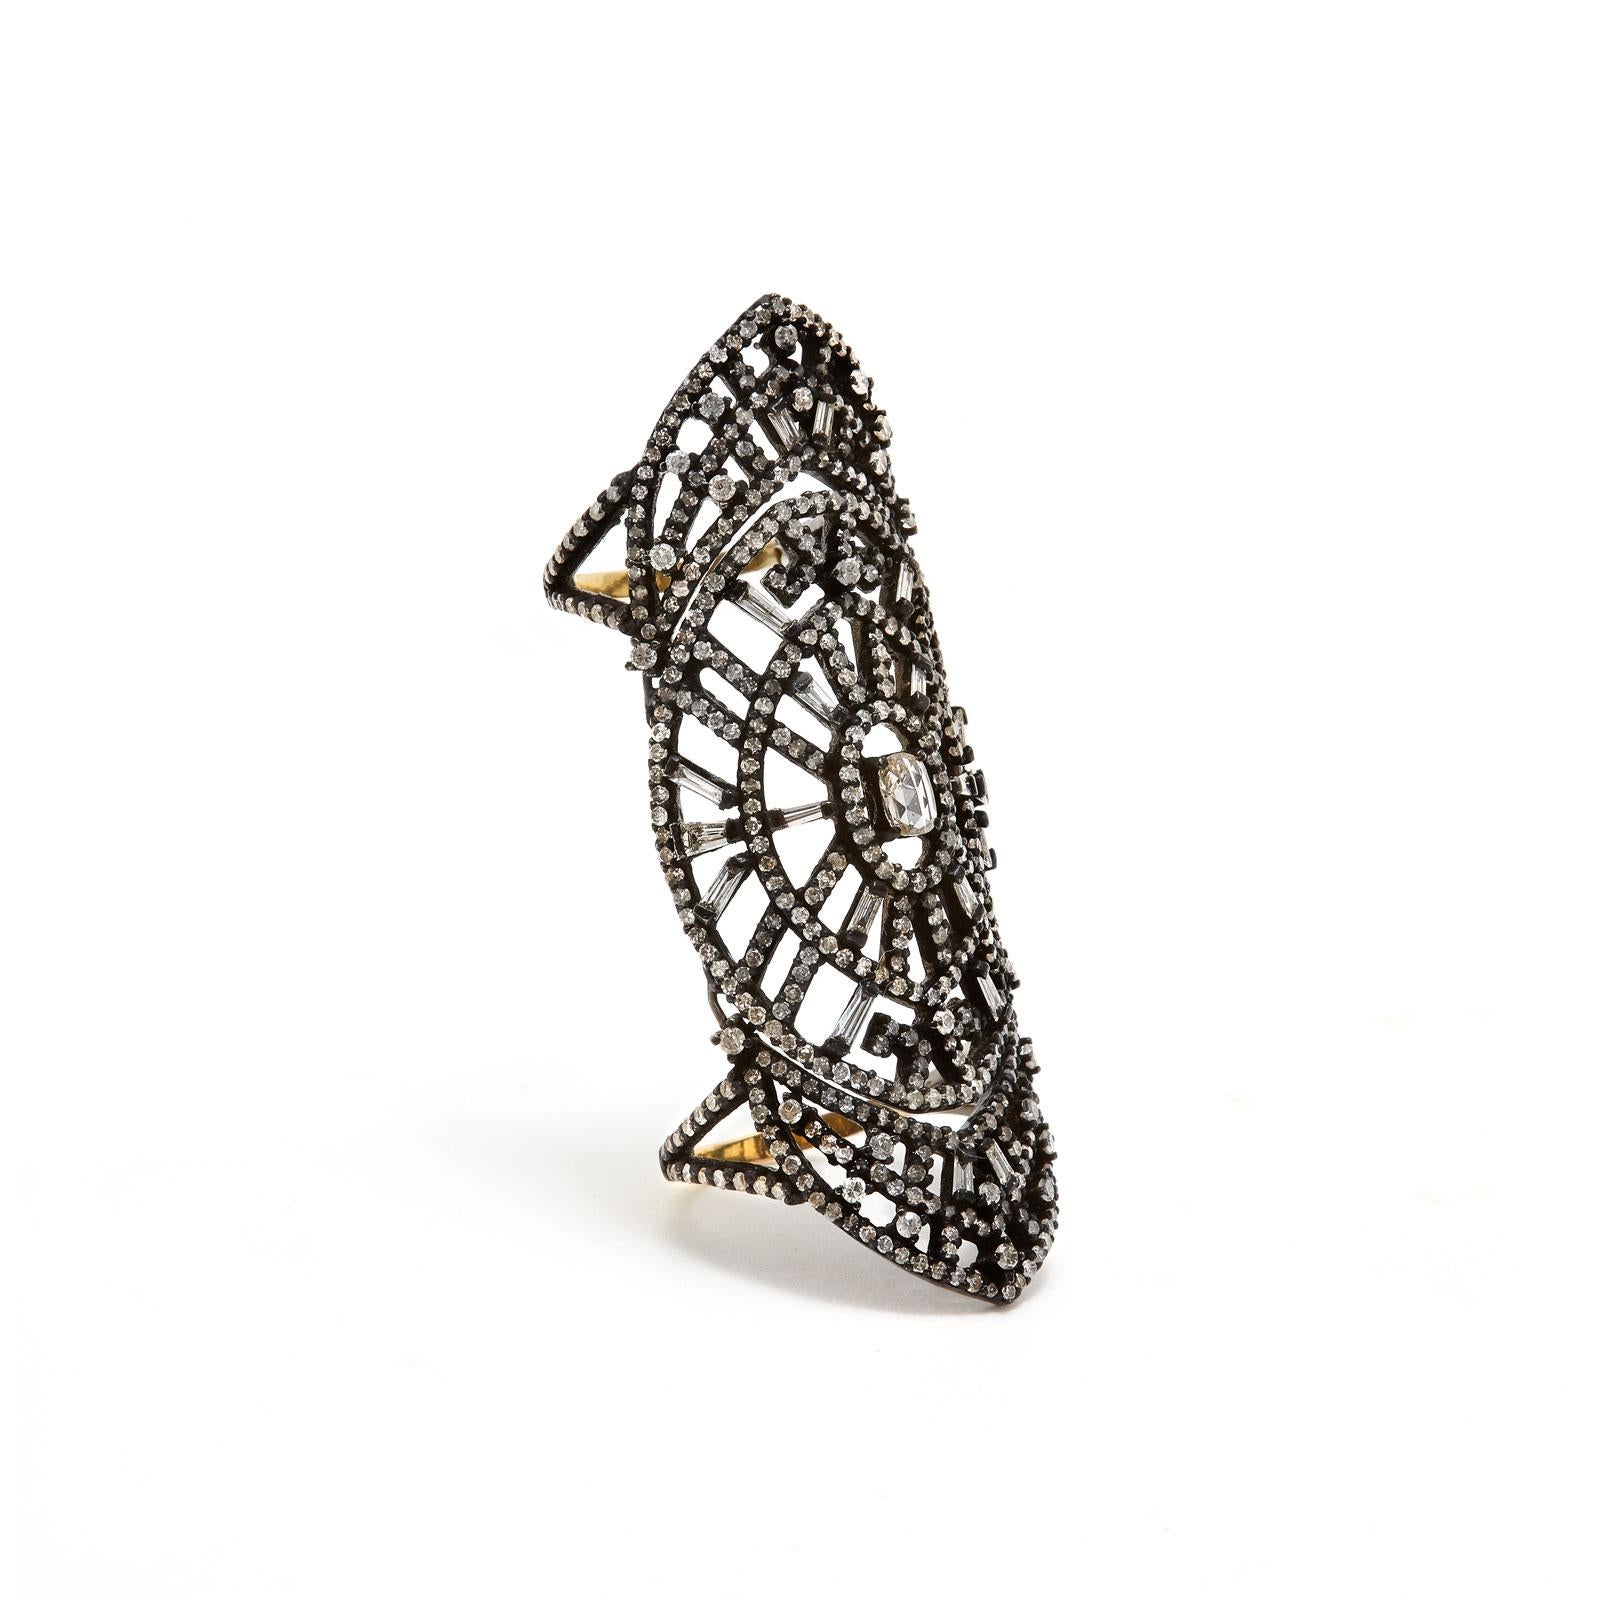 Inspired by the iconic Art Deco Era in jewelry... Stunning Diamond Baguettes and Rose Cut Diamonds in a hinged shield ring design. Set in Blackened Silver with Gold bands.

- Natural Diamond Baguettes and Rose Cut Diamonds weight approx 2.74